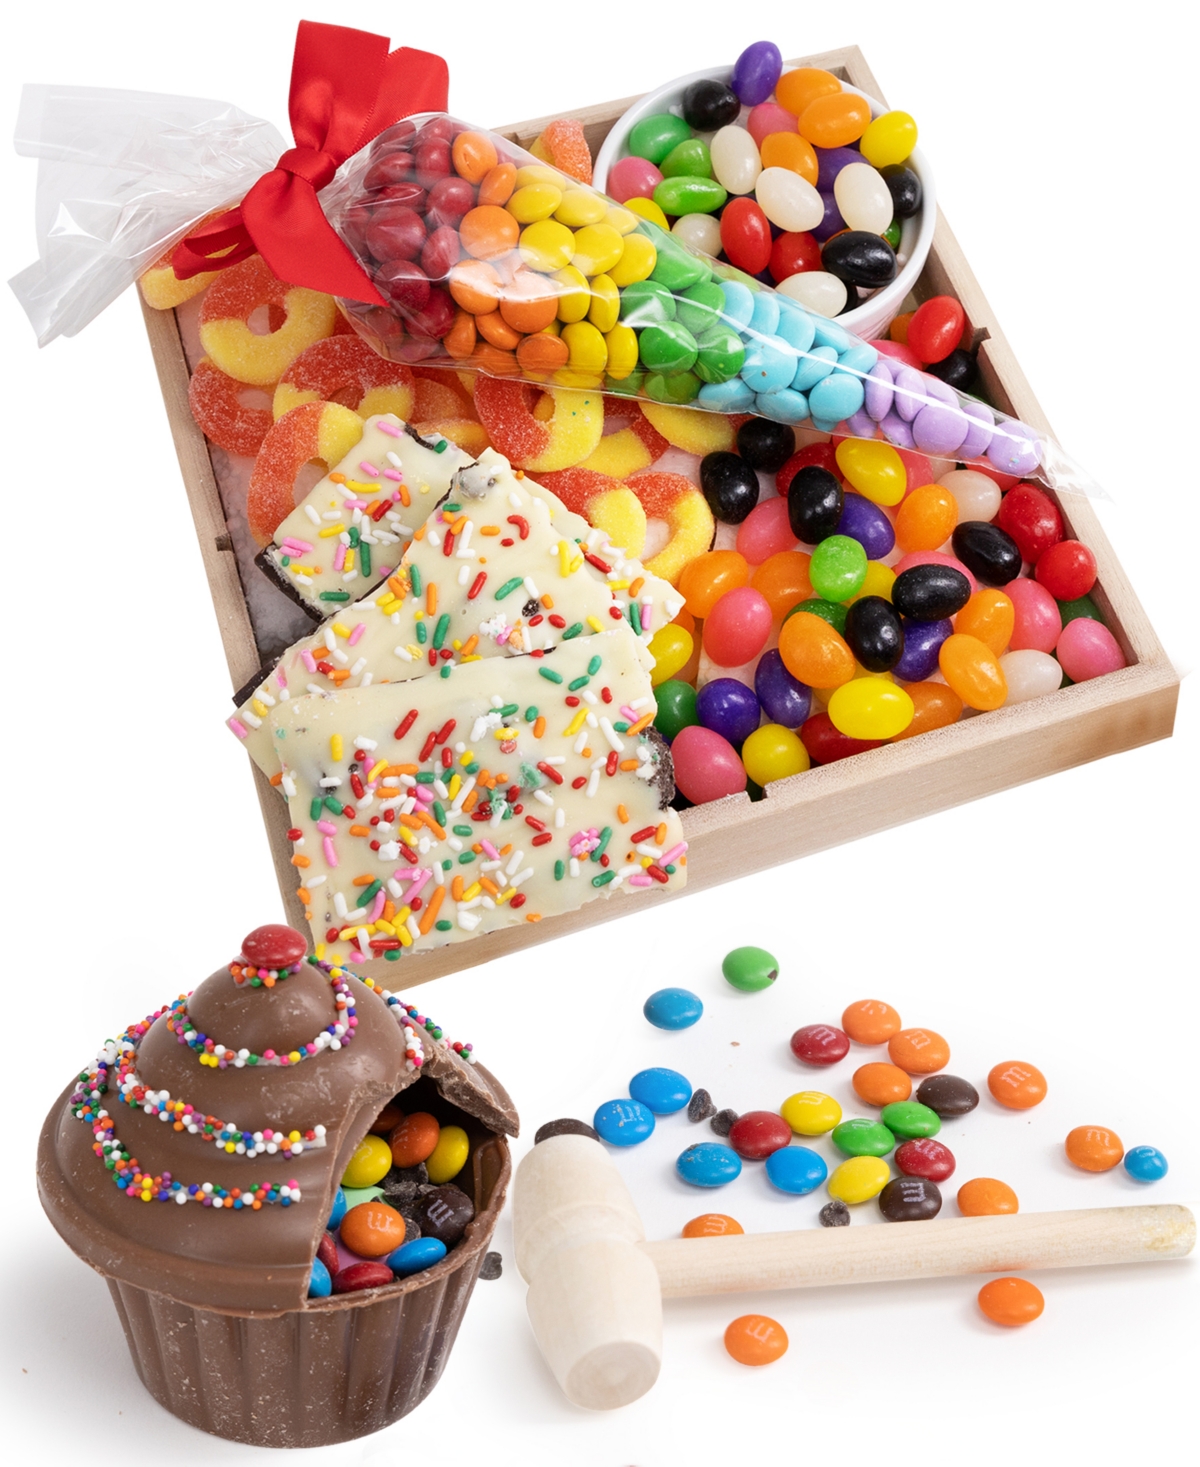 Chocolate Covered Company Celebration Candy And Chocolate Treats Tray In No Color